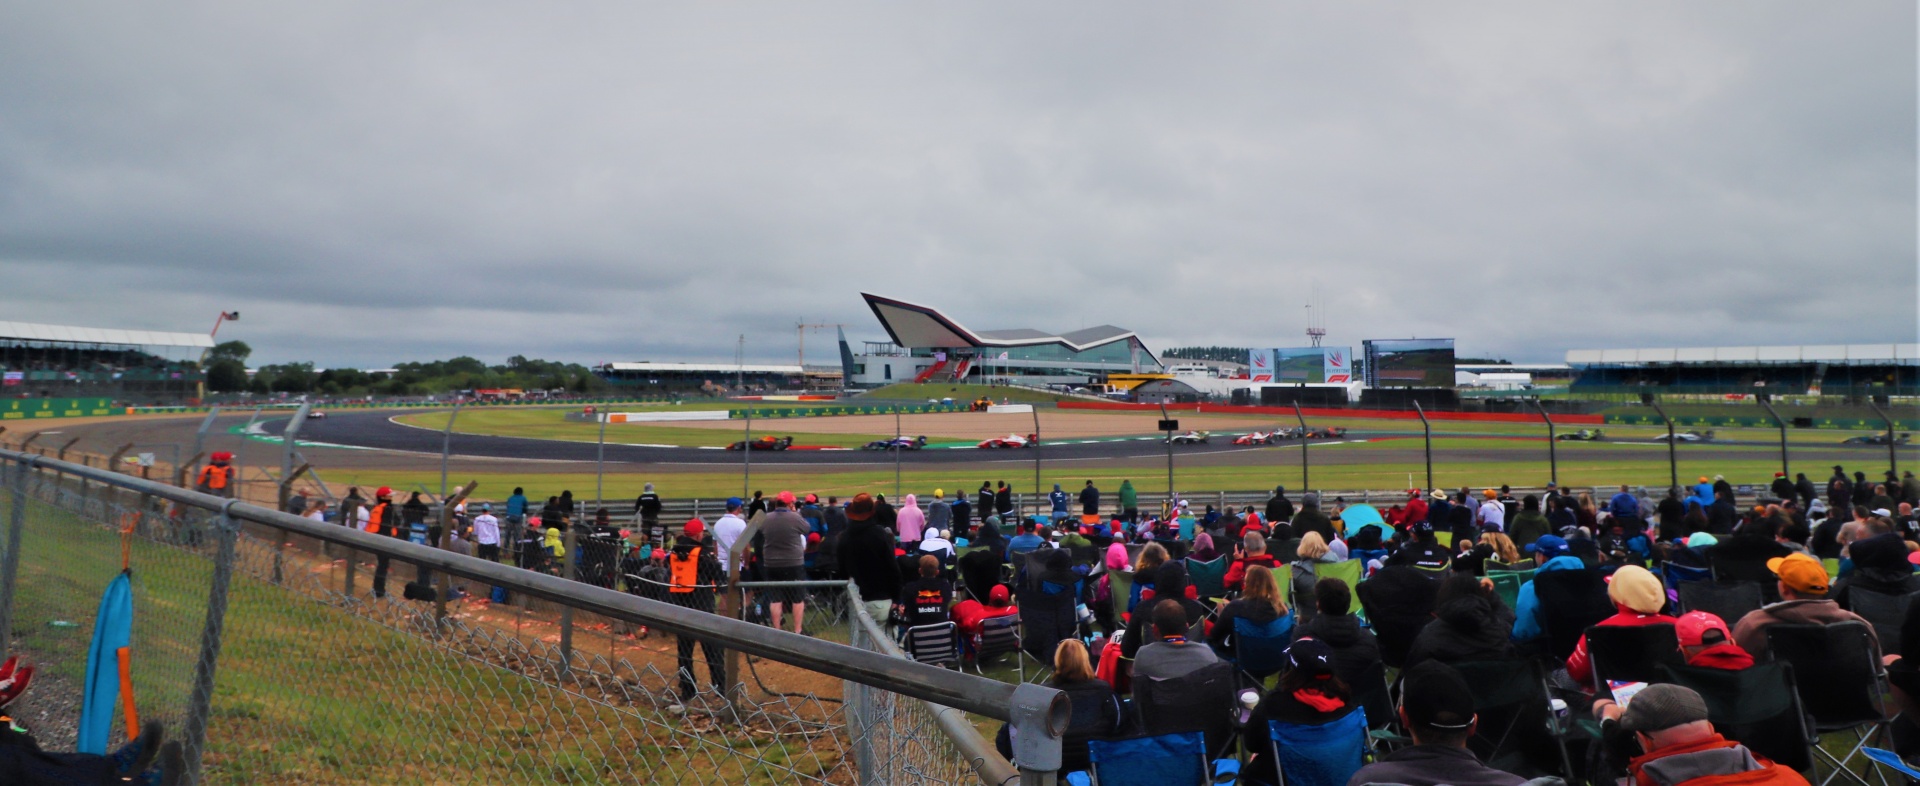 Formula 3 race at silverstone from Vale corner